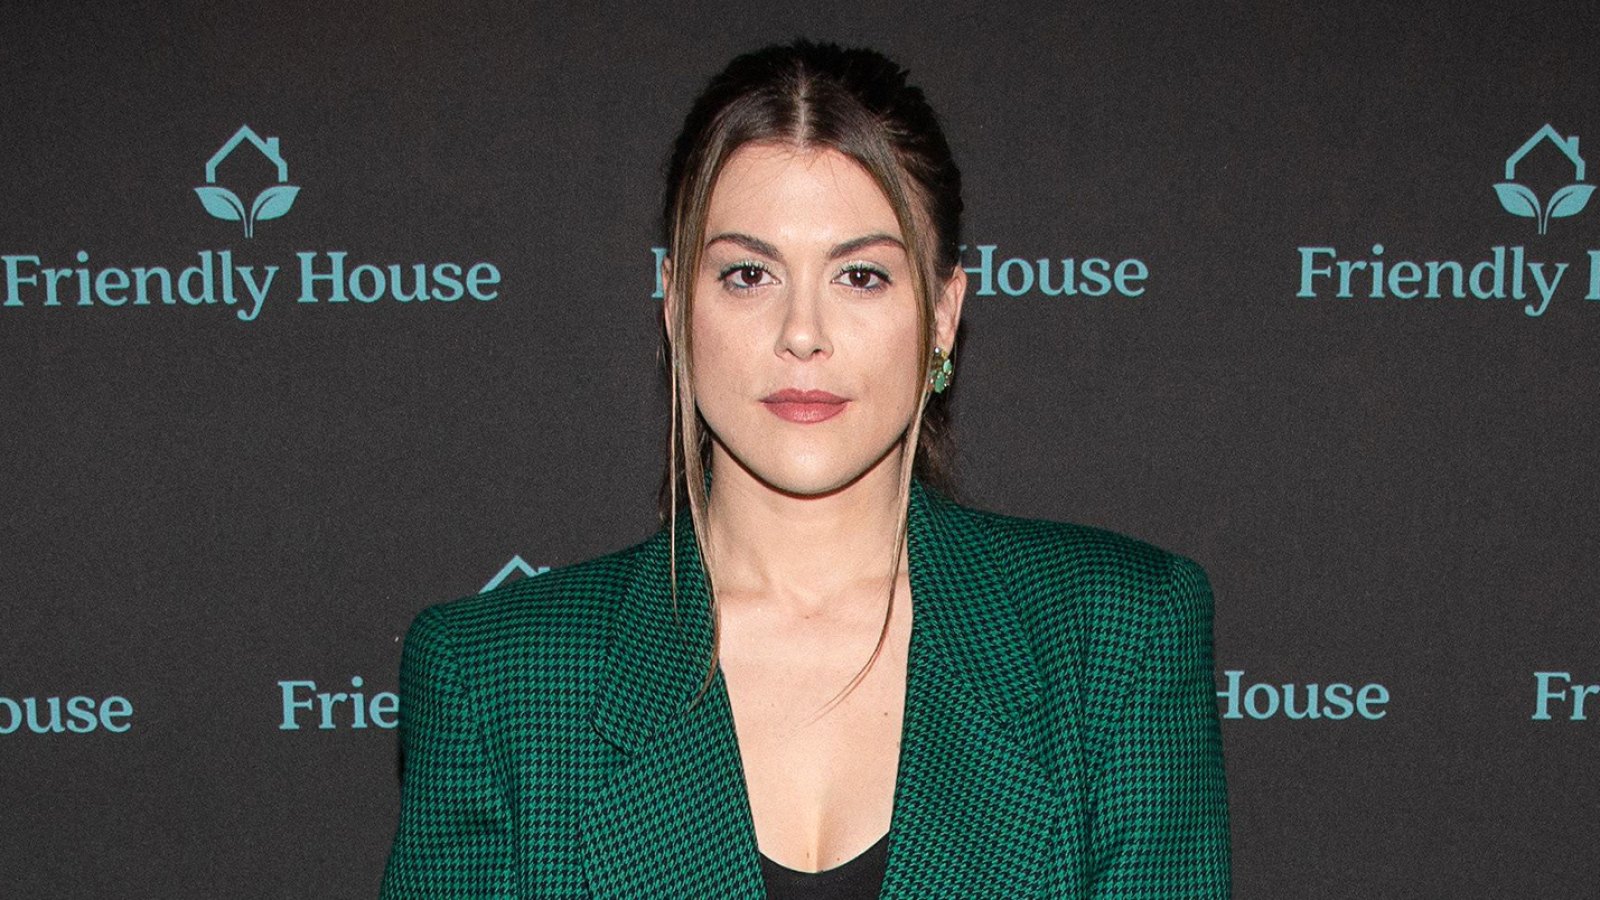 Pretty Little Liars' Lindsey Shaw Recalls How Xanax Overdose Led to 2 5150 Psychiatric Holds